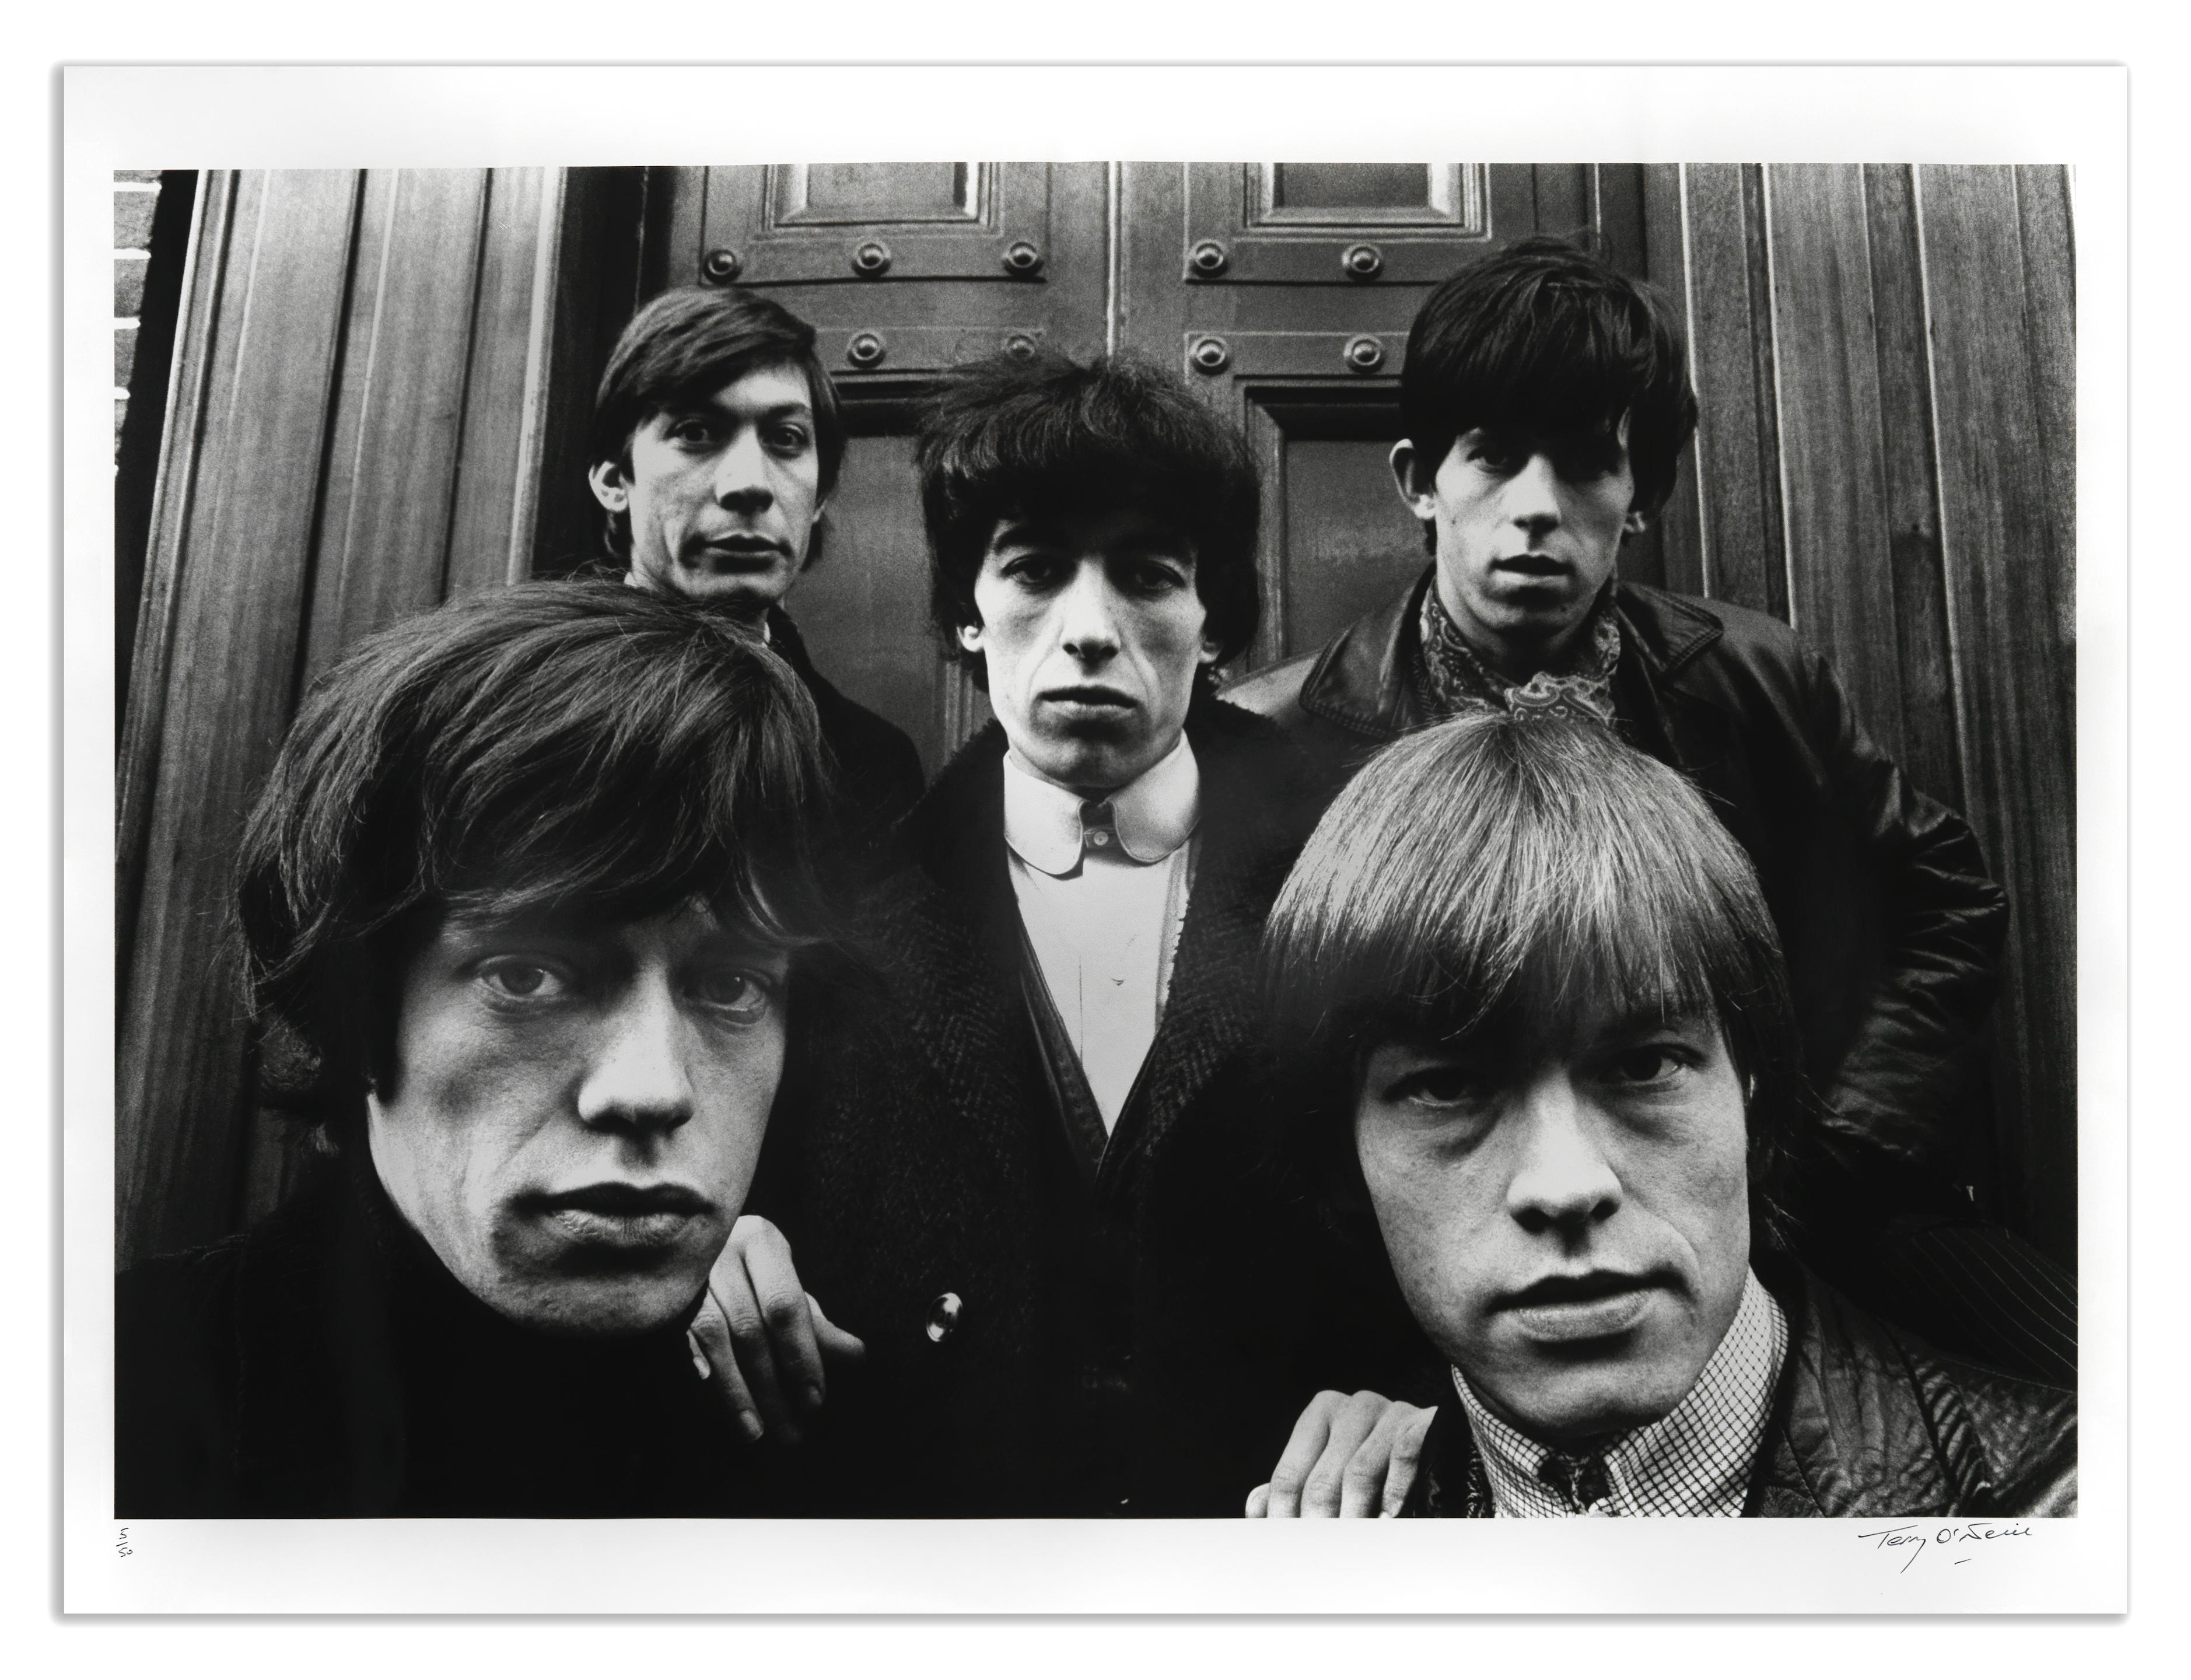 Rolling Stones portrait book. Rolling stones song stoned